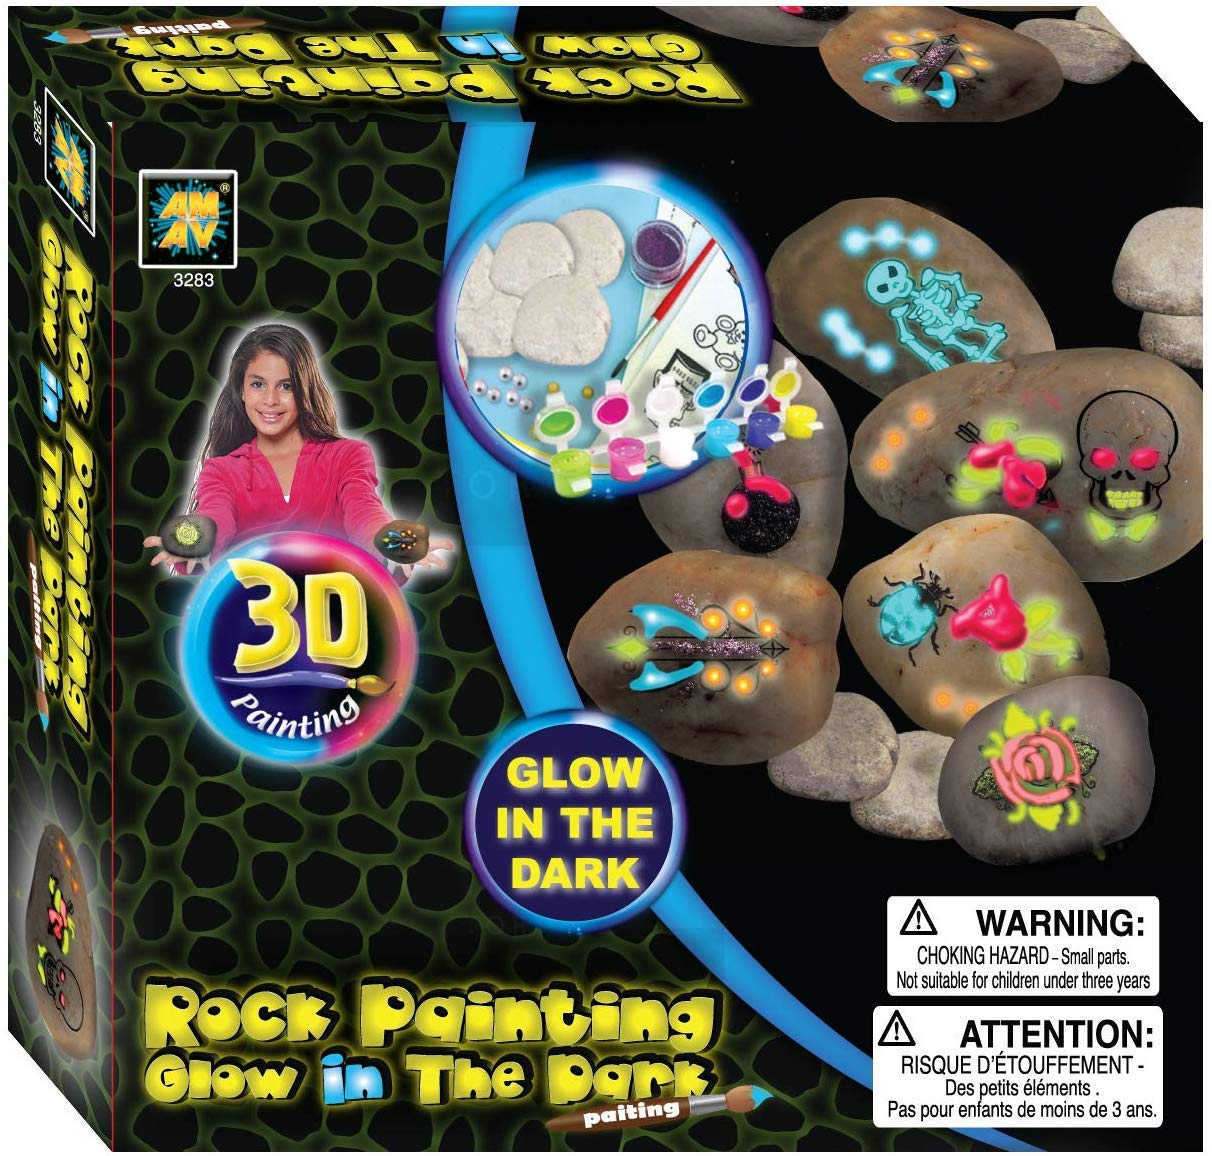 AMAV Toys Glow in The Dark Rock Painting Kit- All Supplies Included - Non-Toxic Acrylic Paint- Craft & Spread Positivity Around Your Community- Perfect Screen-Free & Group Activity for Kids Aged 6+